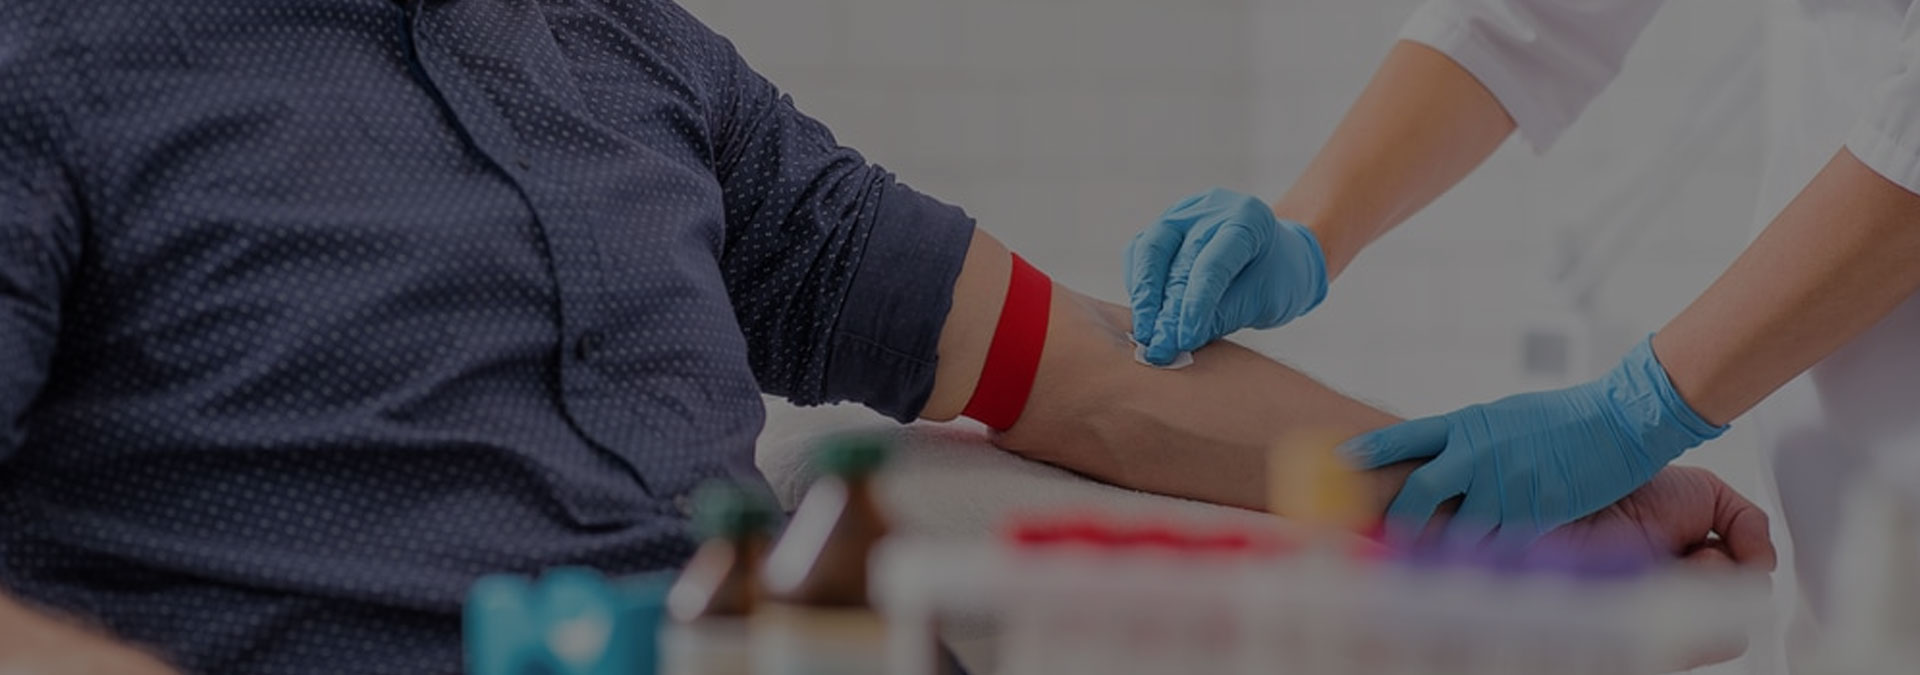 Mobile Phlebotomy Services Blood Draw Los Angeles, Orange County CA